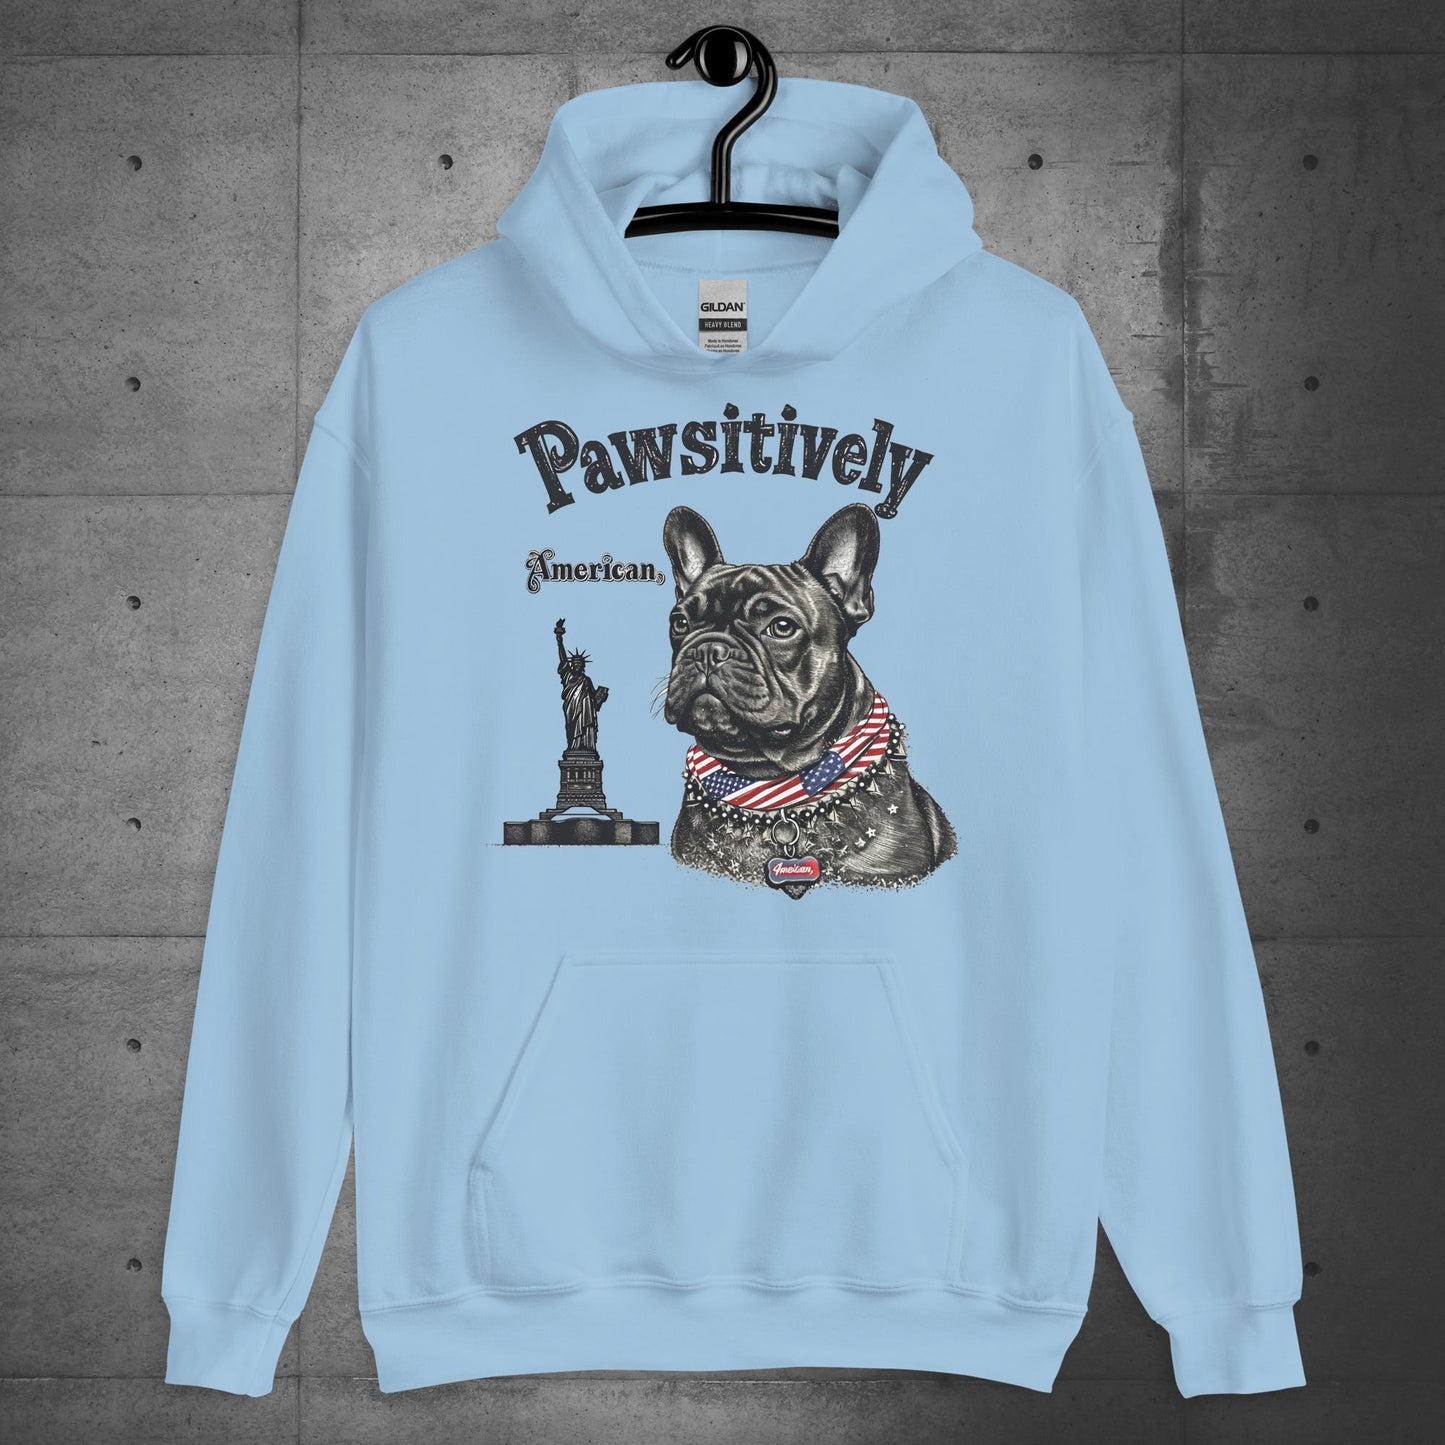 Unisex "Pawsitively American" French Bulldog Hoodie